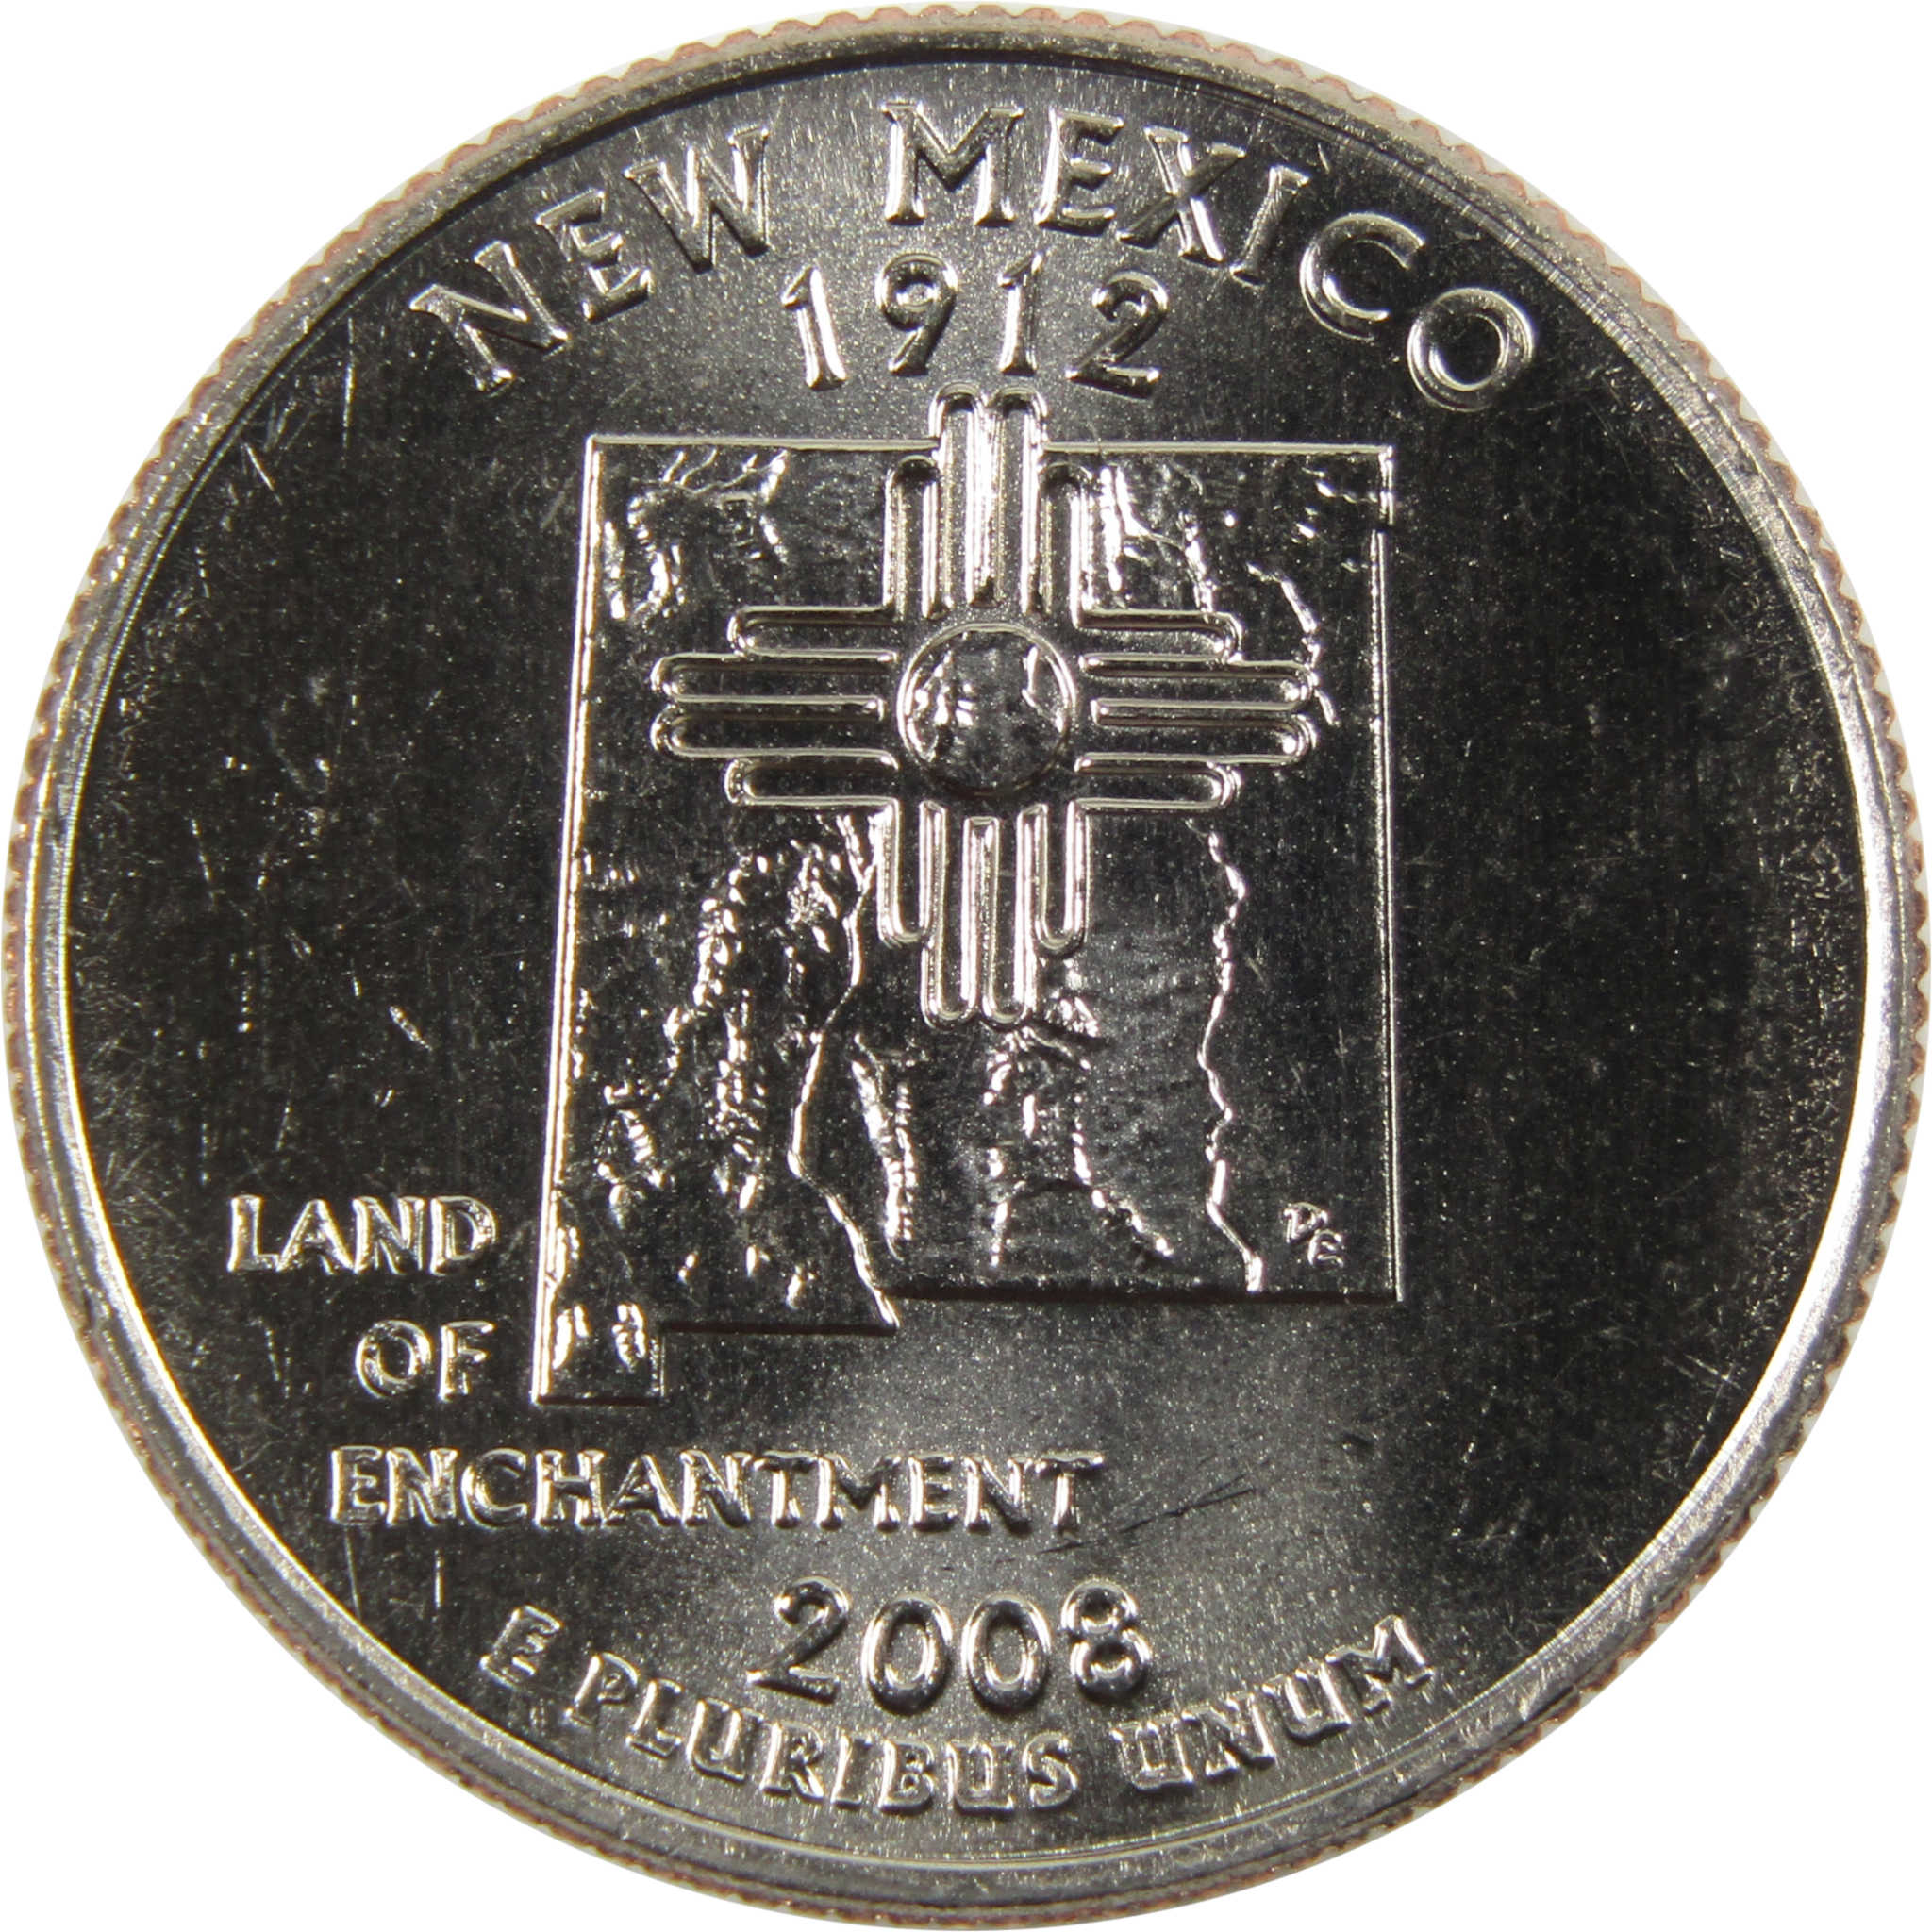 2008 D New Mexico State Quarter BU Uncirculated Clad 25c Coin